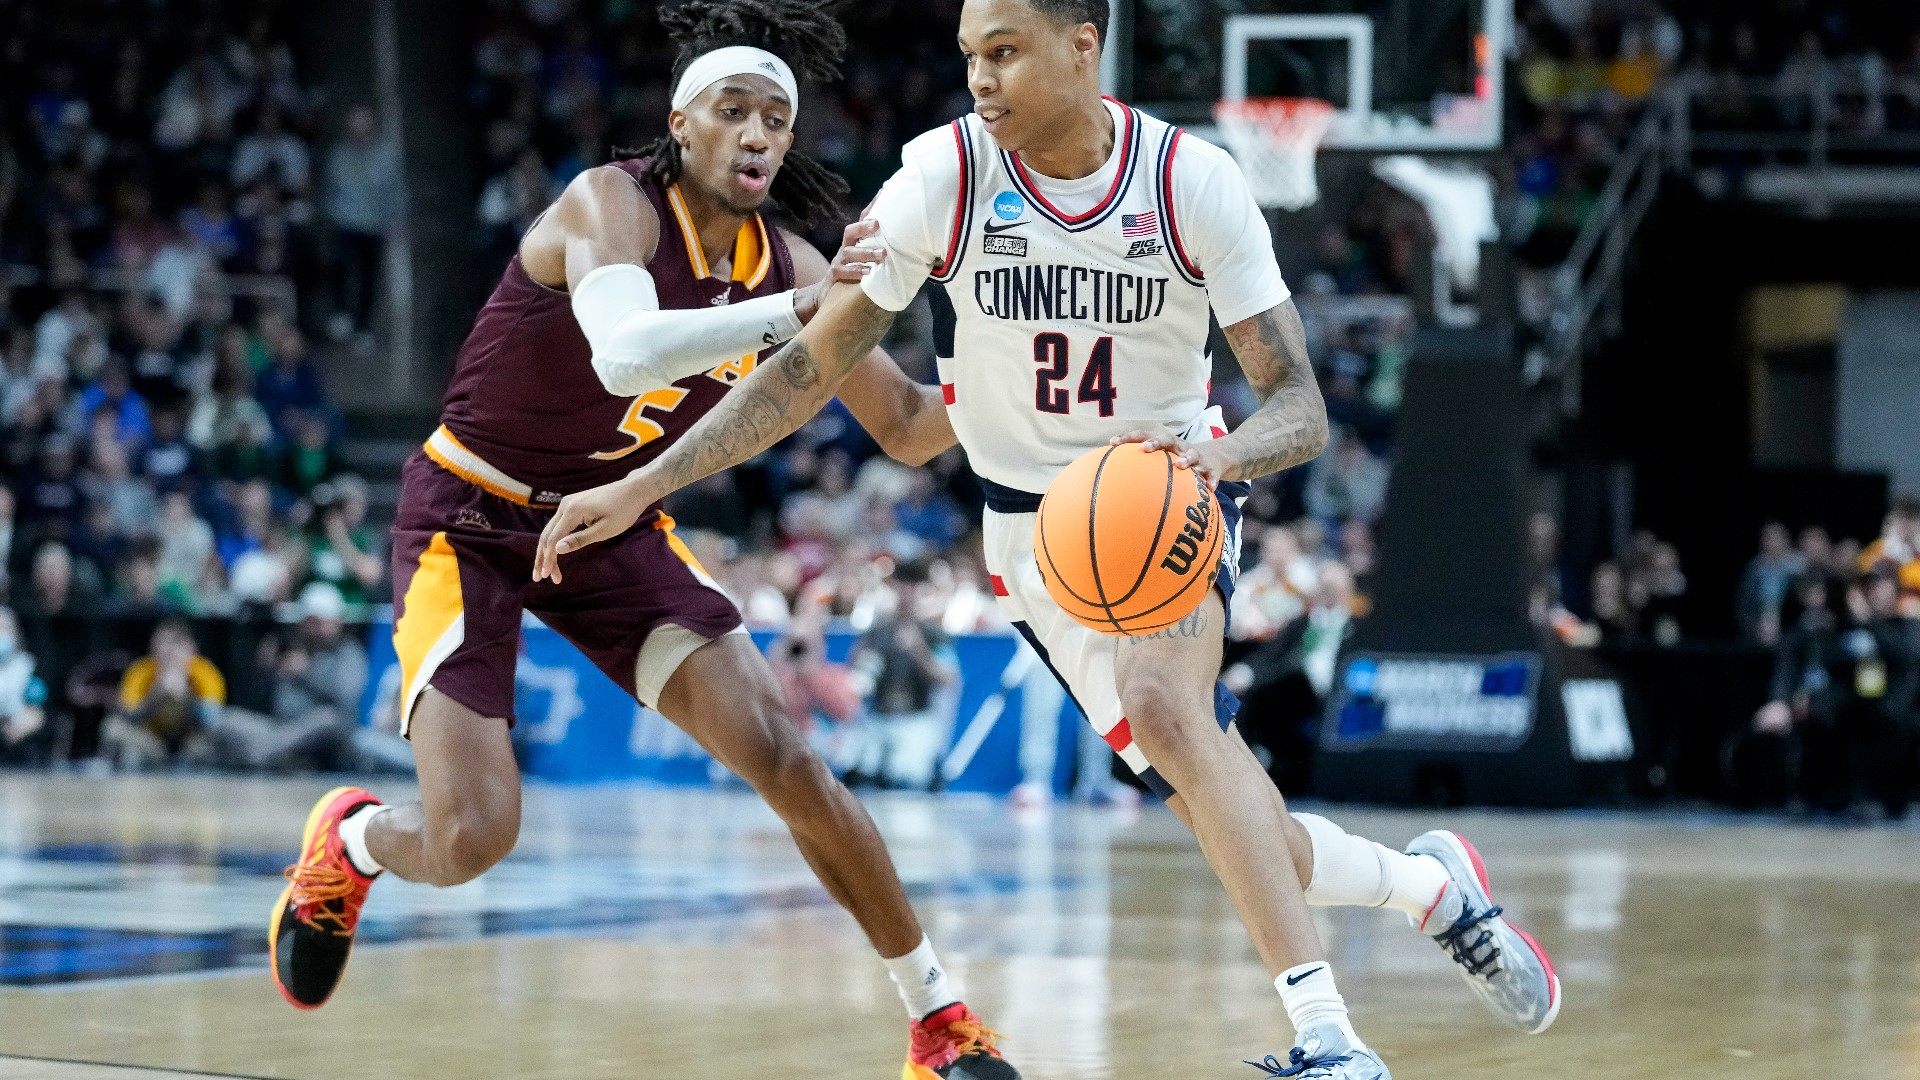 The Huskies advanced to play fifth-seeded Saint Mary's on Sunday in the West Region after losing in the first round under coach Dan Hurley the last two seasons.